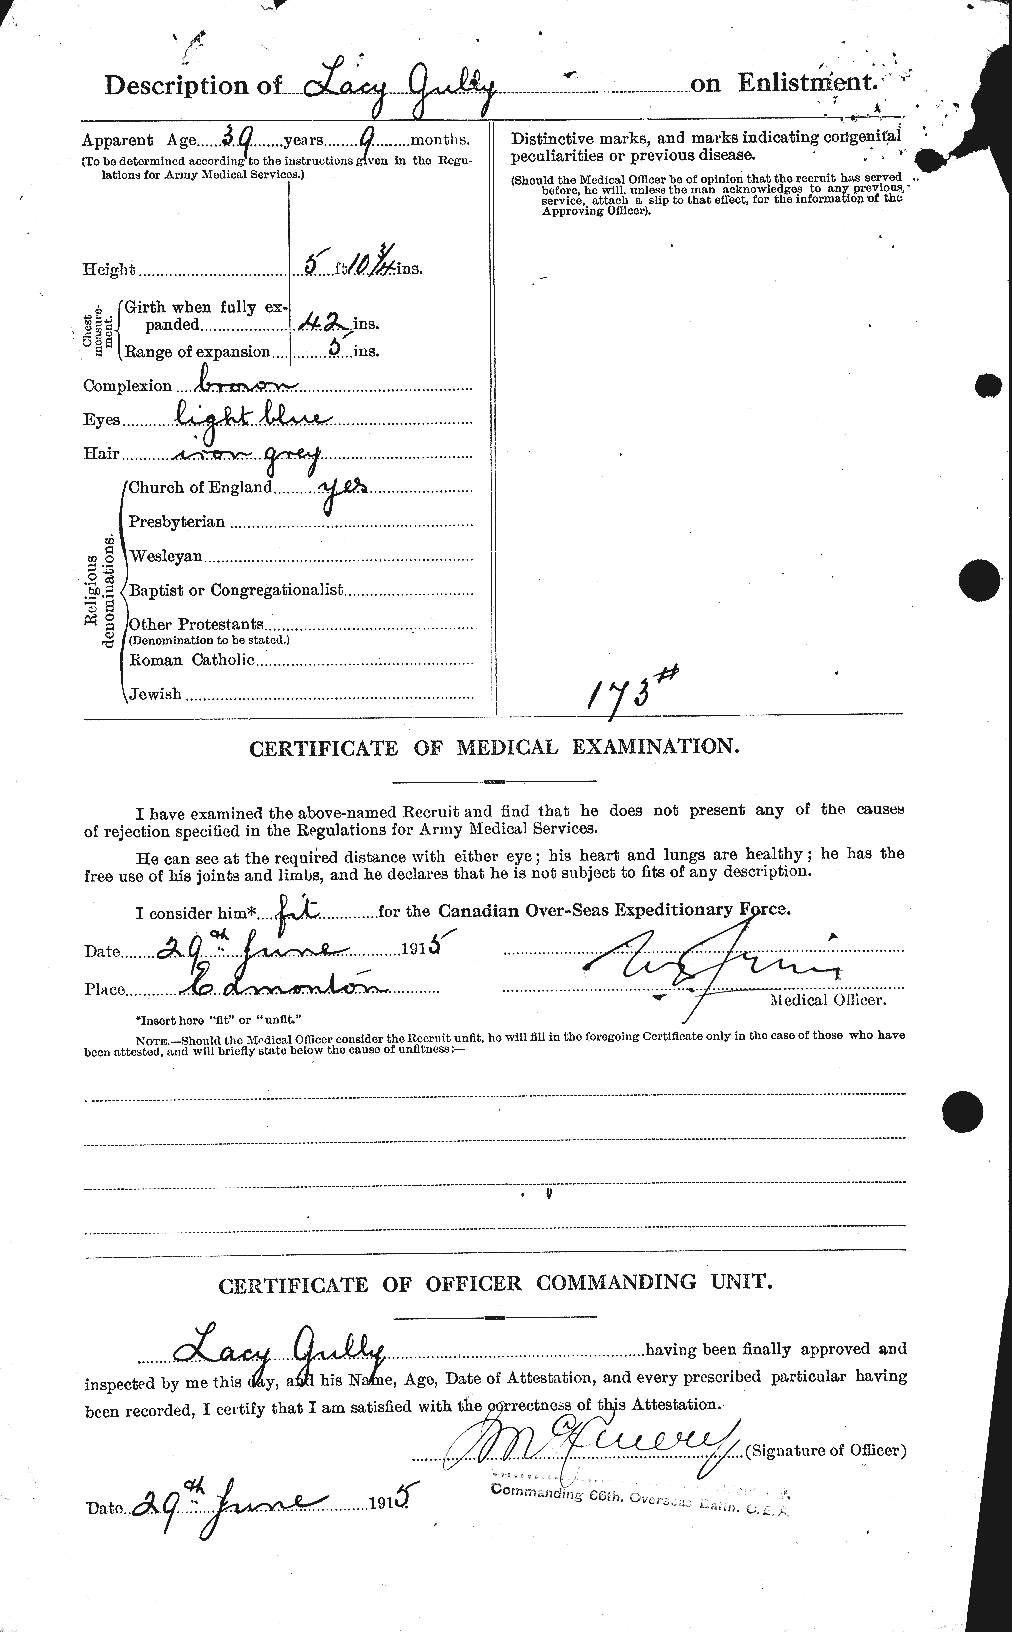 Personnel Records of the First World War - CEF 367928b